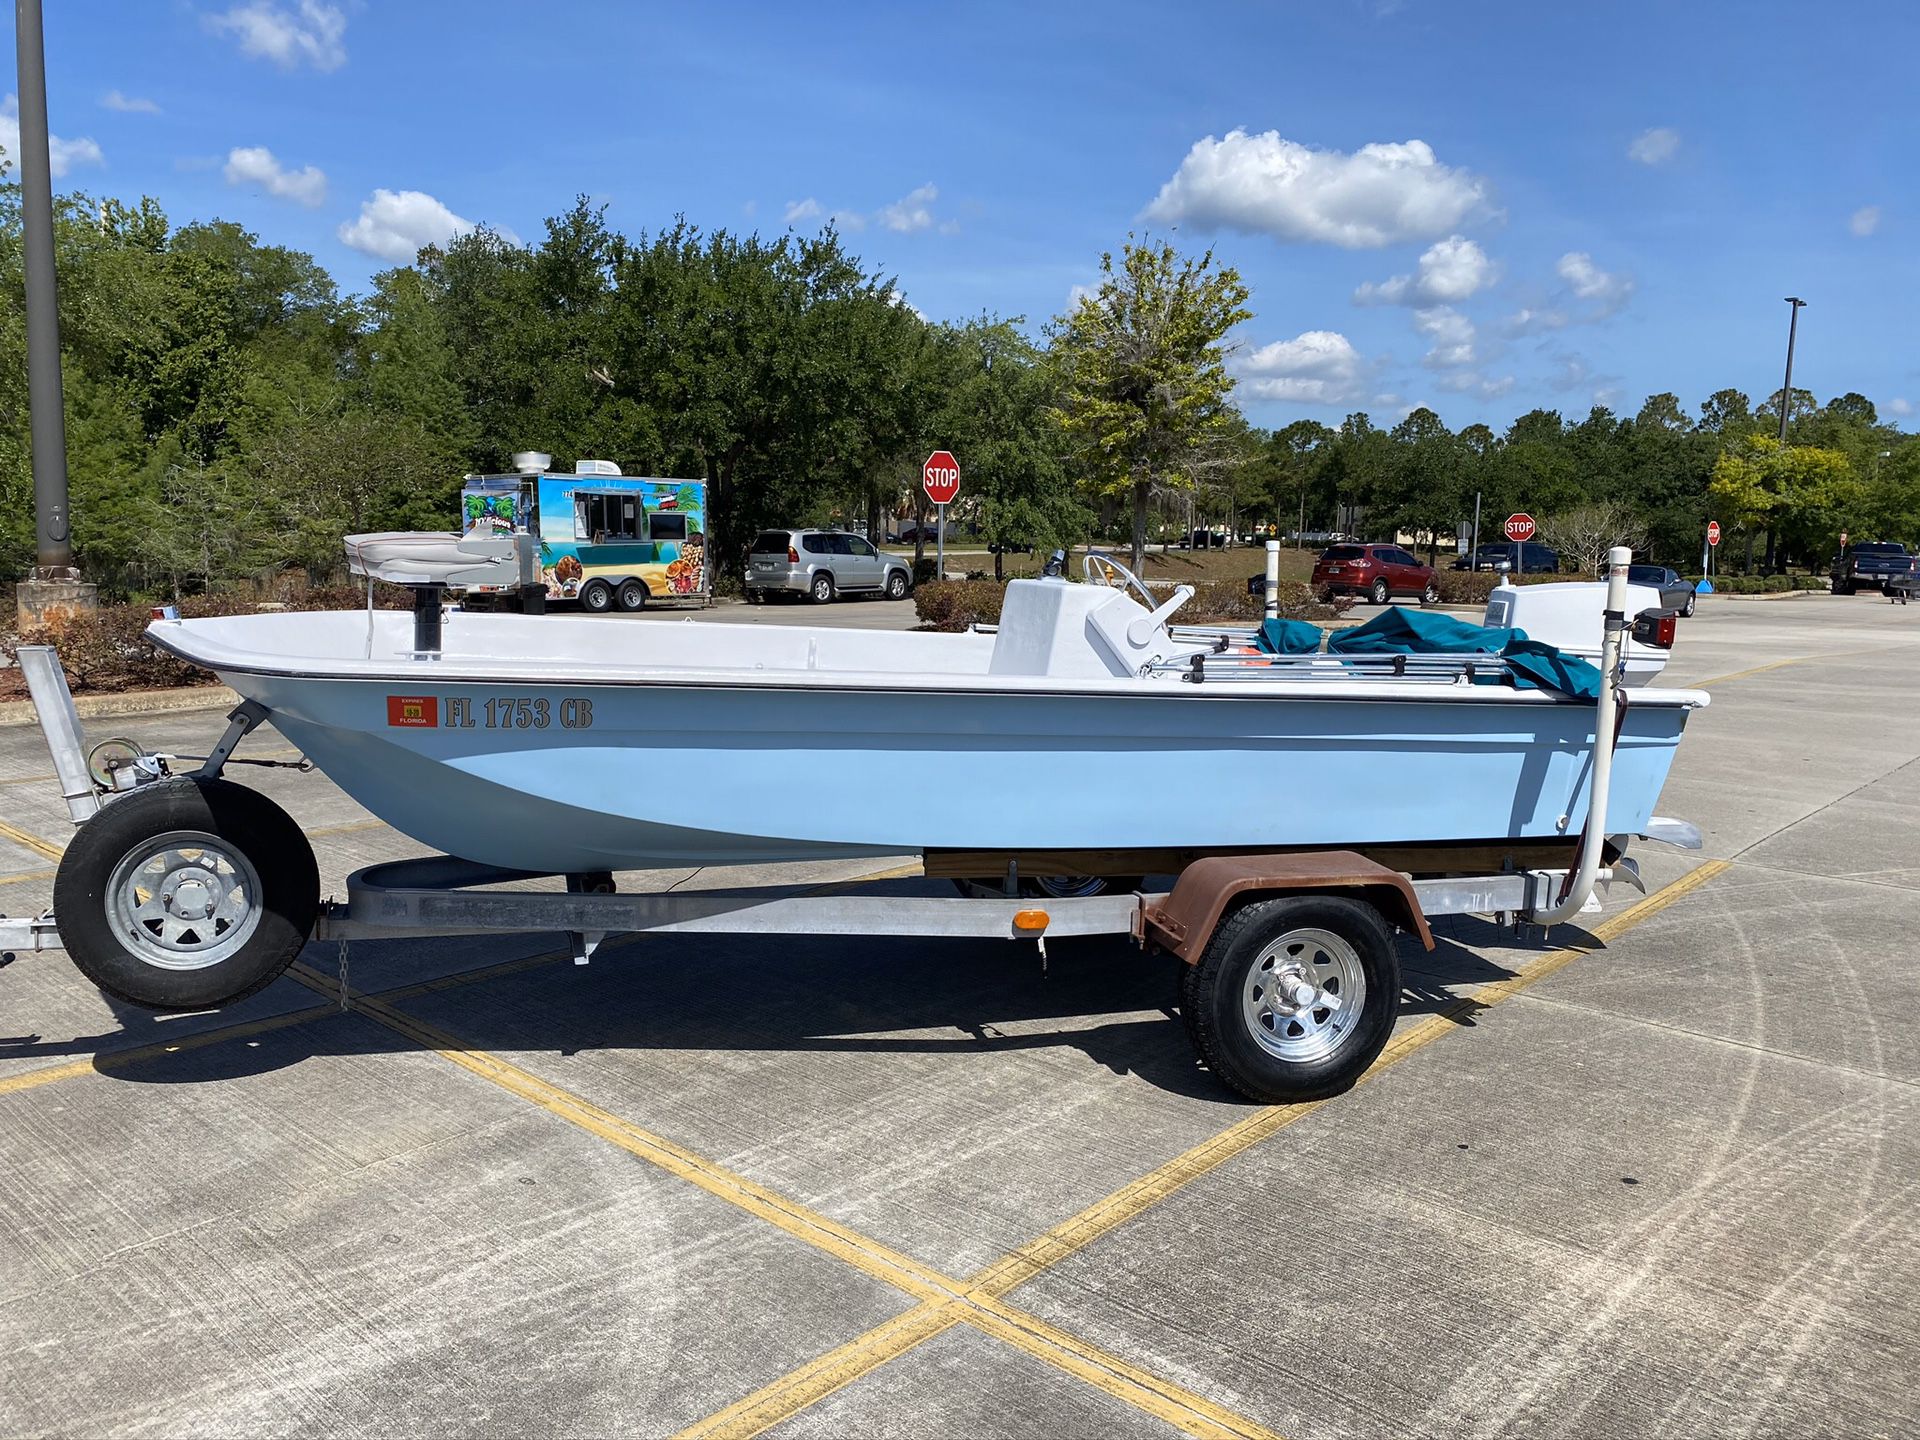 16’ Center Console boat with trailer